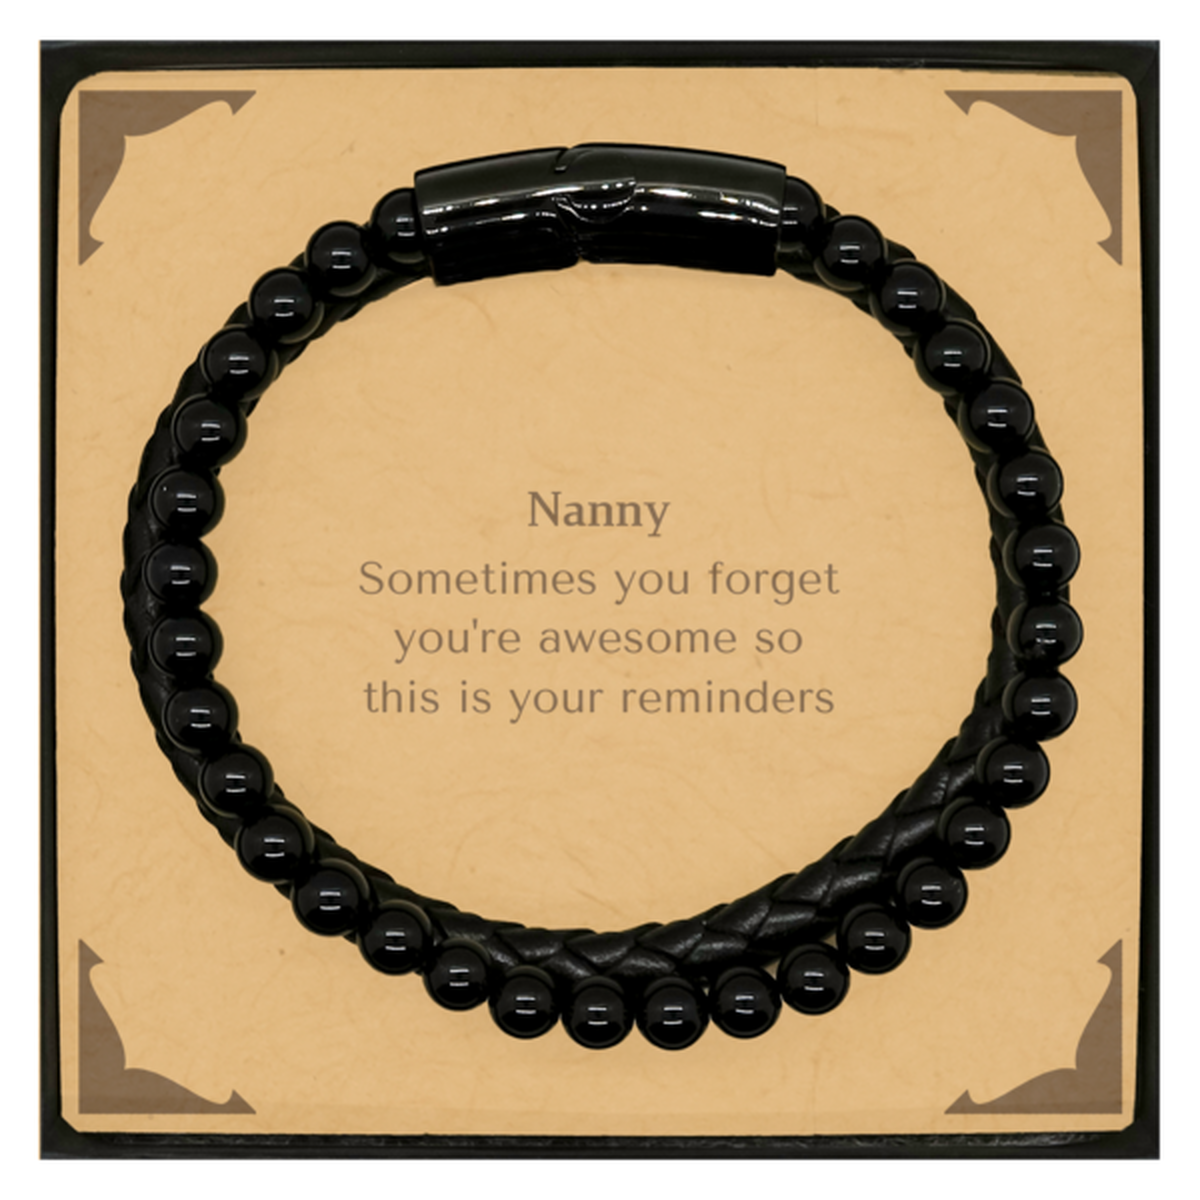 Sentimental Nanny Stone Leather Bracelets, Nanny Sometimes you forget you're awesome so this is your reminders, Graduation Christmas Birthday Gifts for Nanny, Men, Women, Coworkers